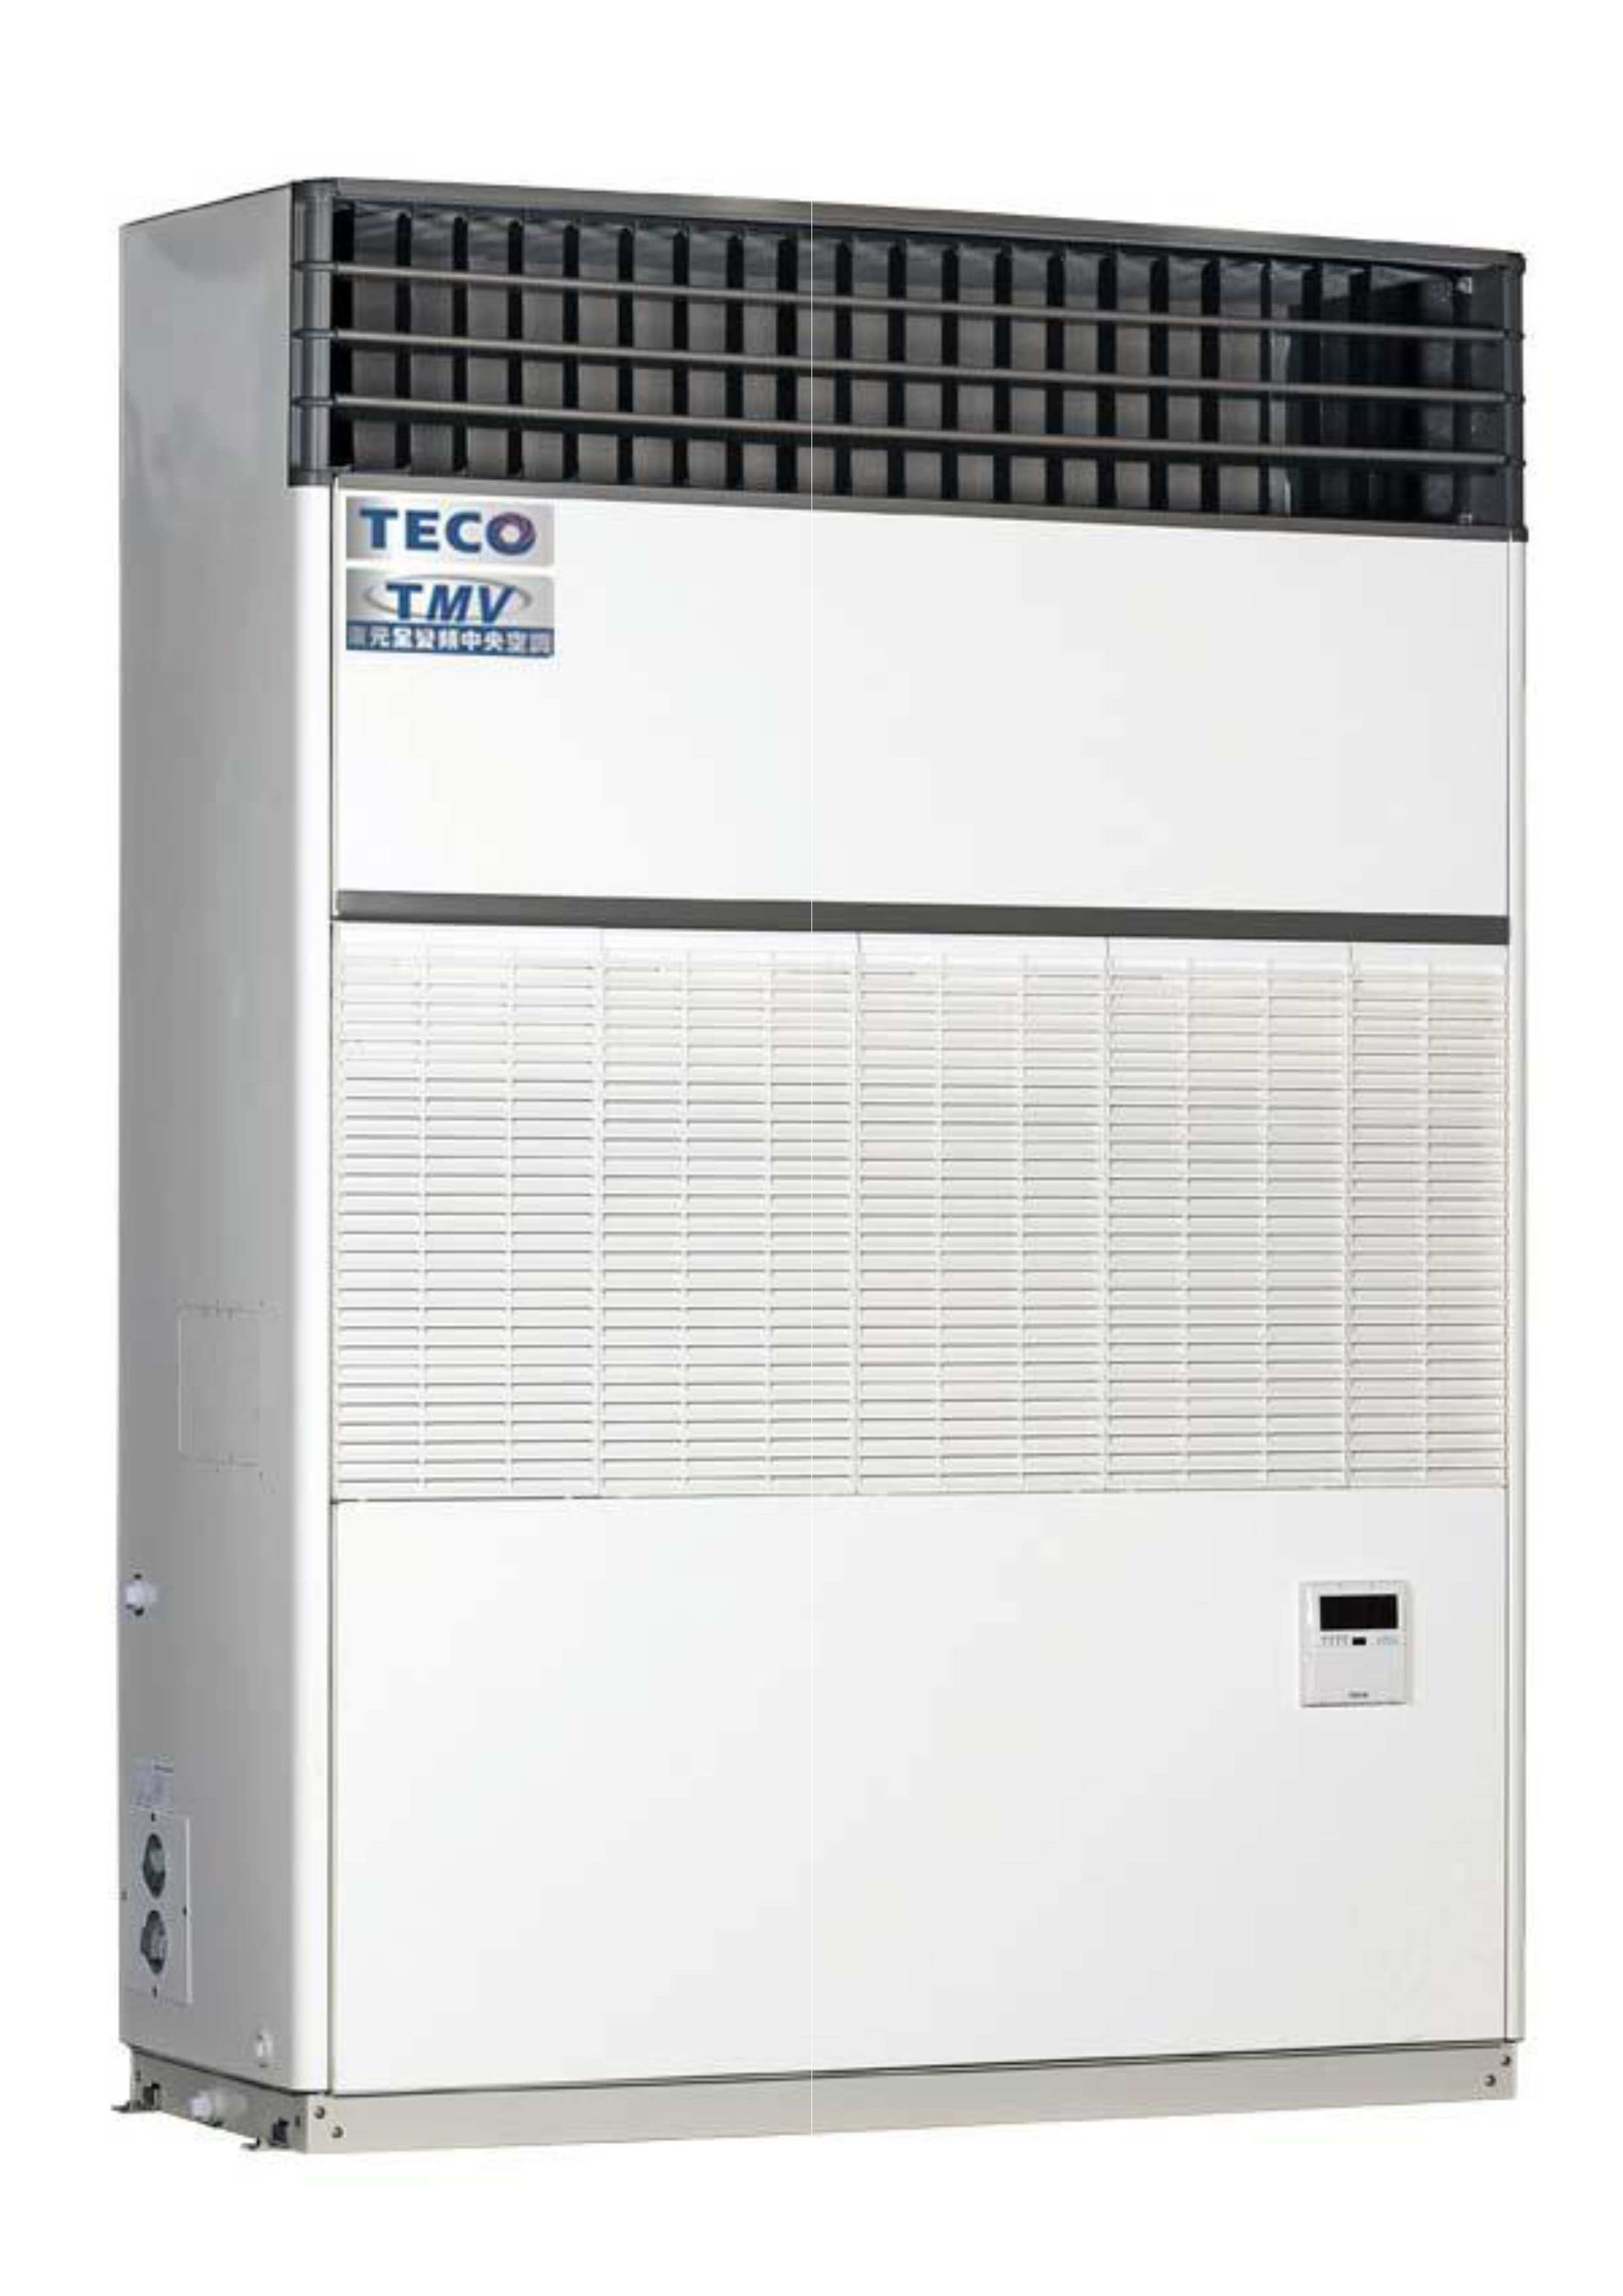 Smart Dual-power Generation System Water-cooled Inverter Commerical ACs